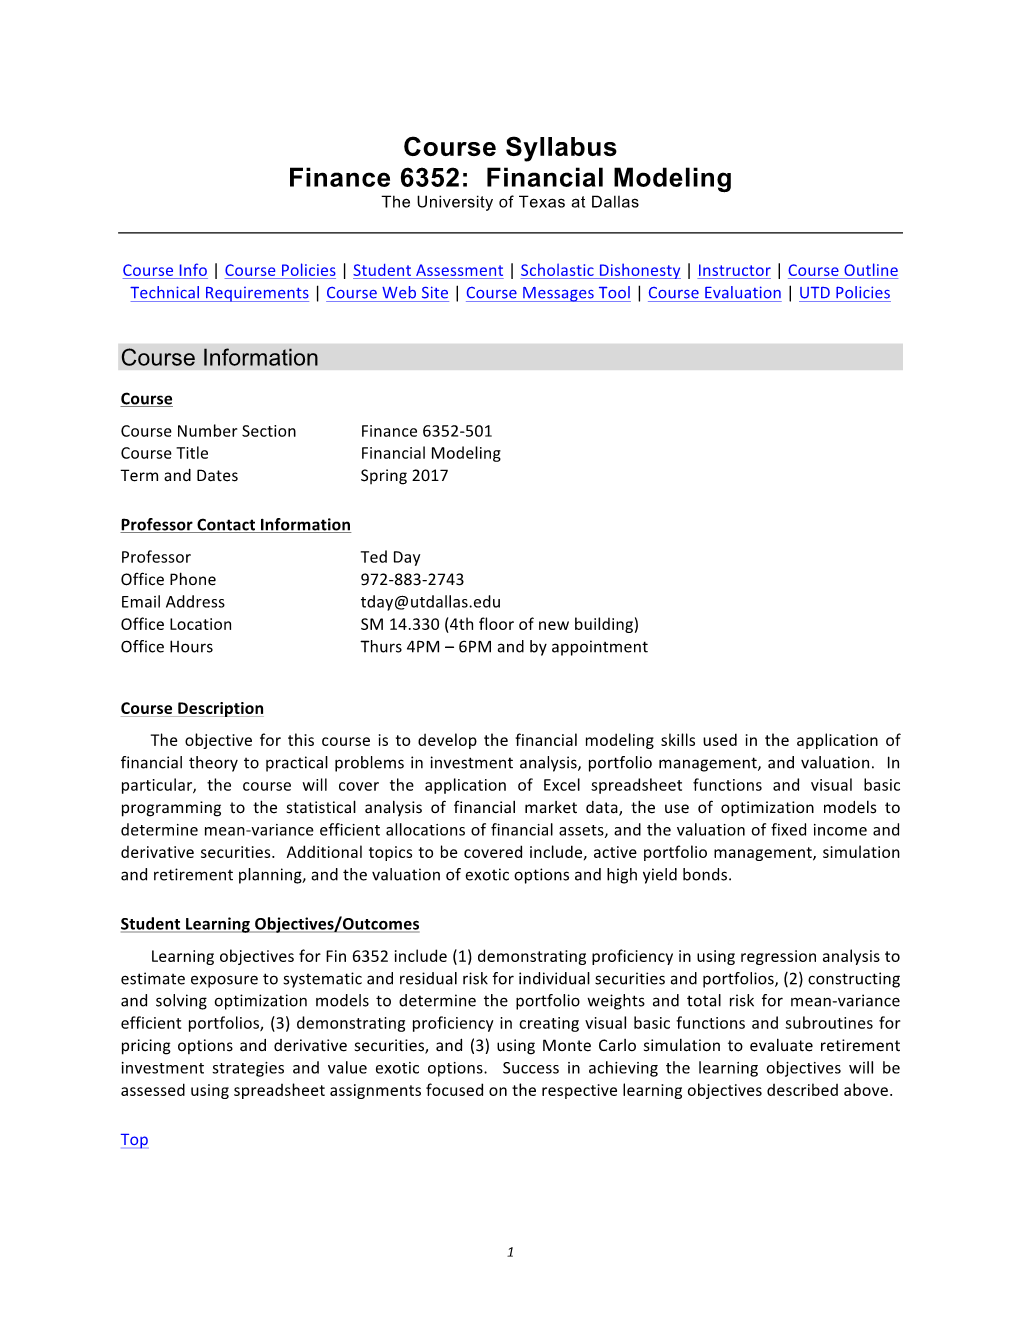 Course Syllabus Finance 6352: Financial Modeling the University of Texas at Dallas